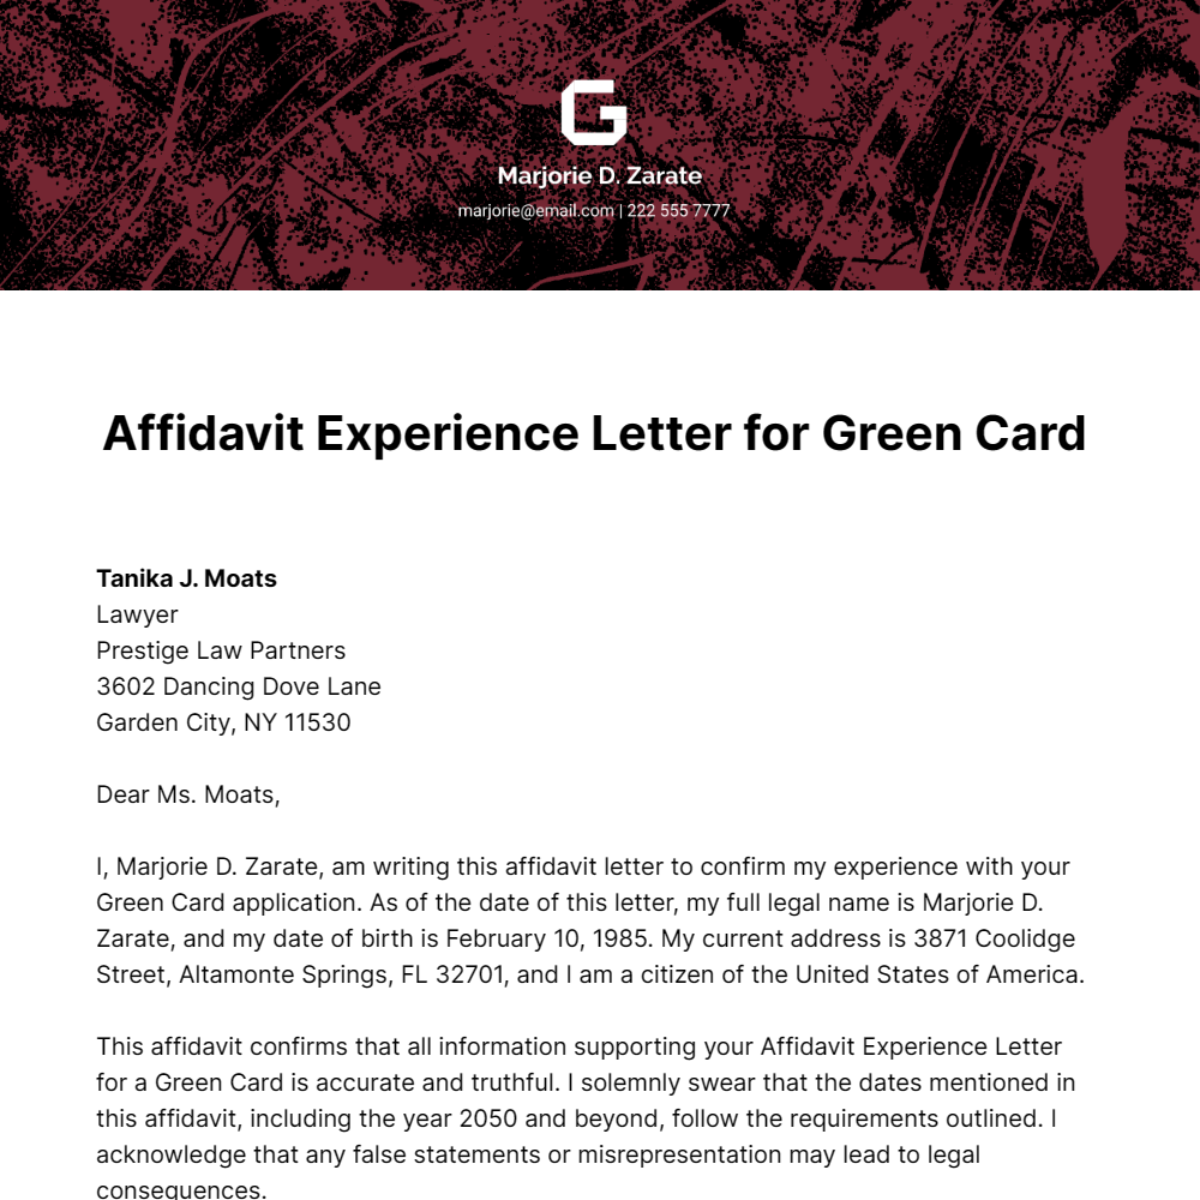 Affidavit Experience Letter for Green Card   Template